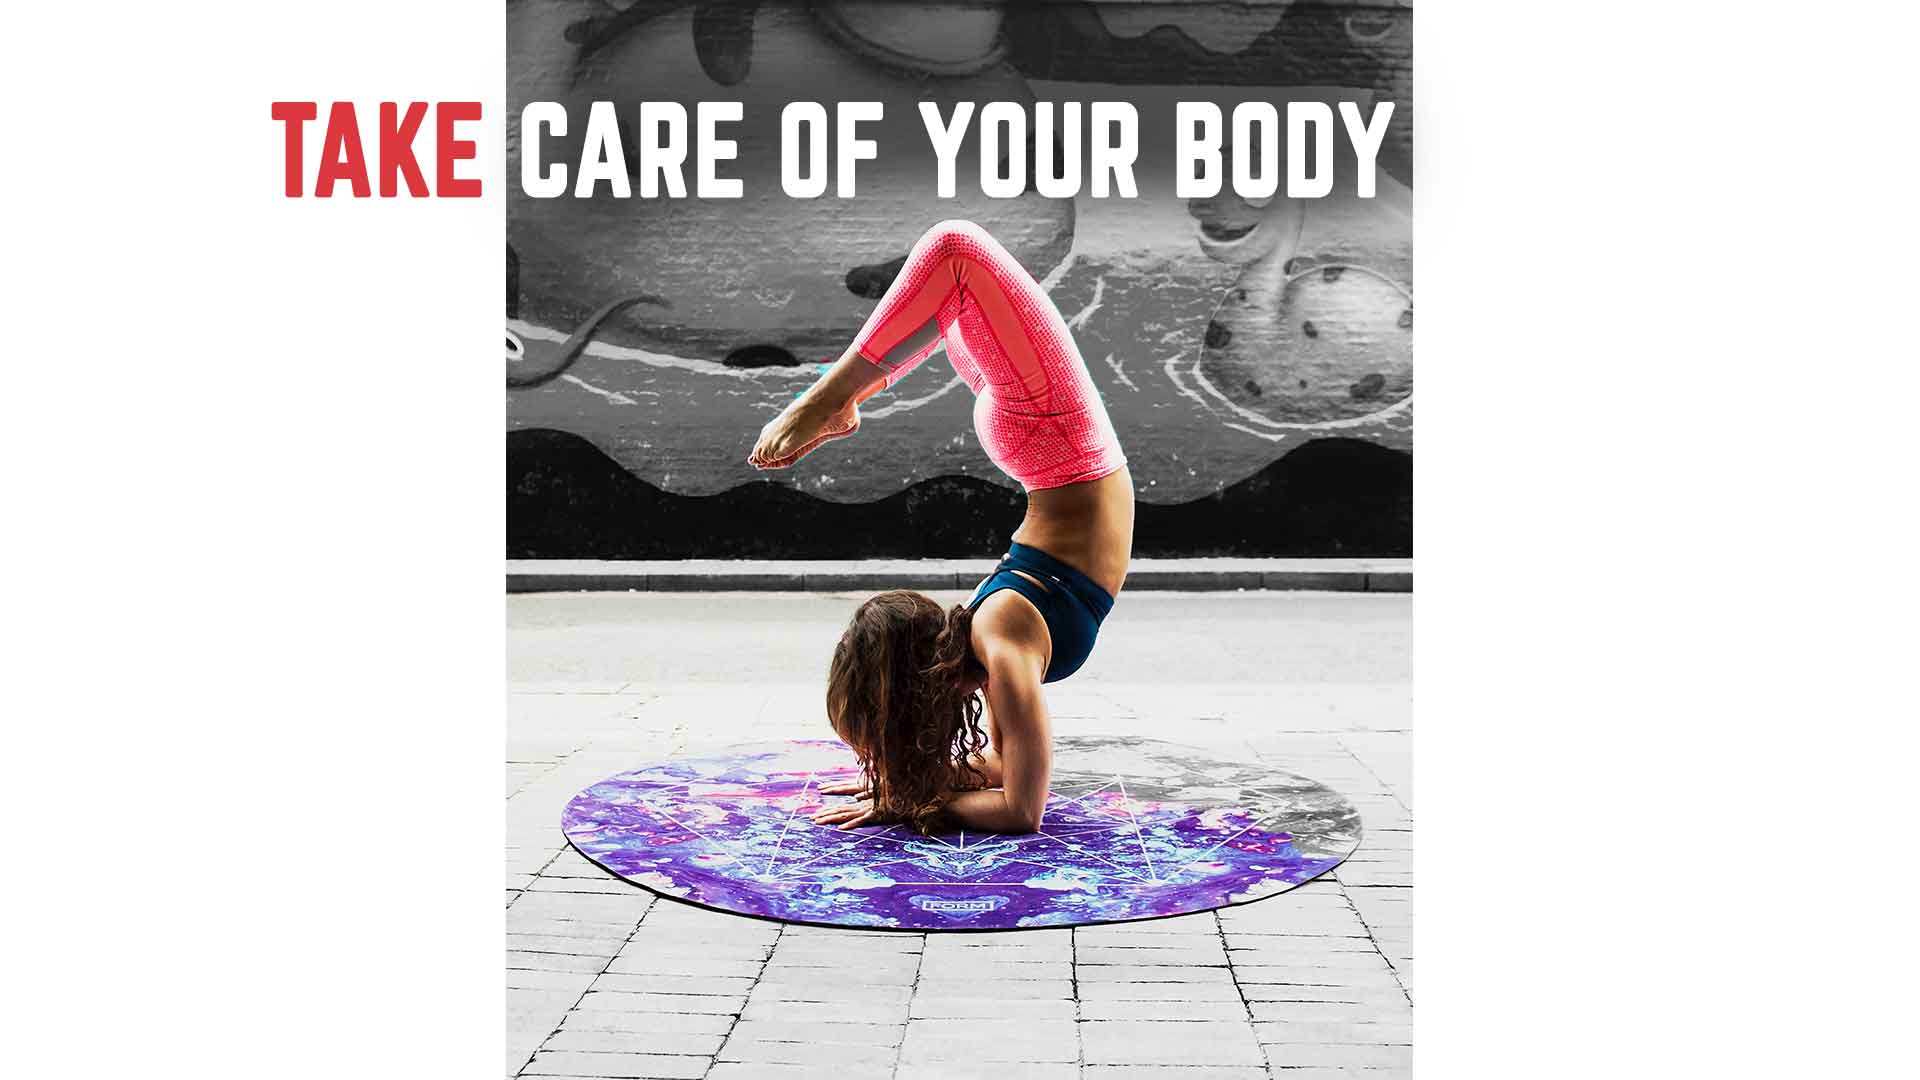 Take-care-of-your-body-quote